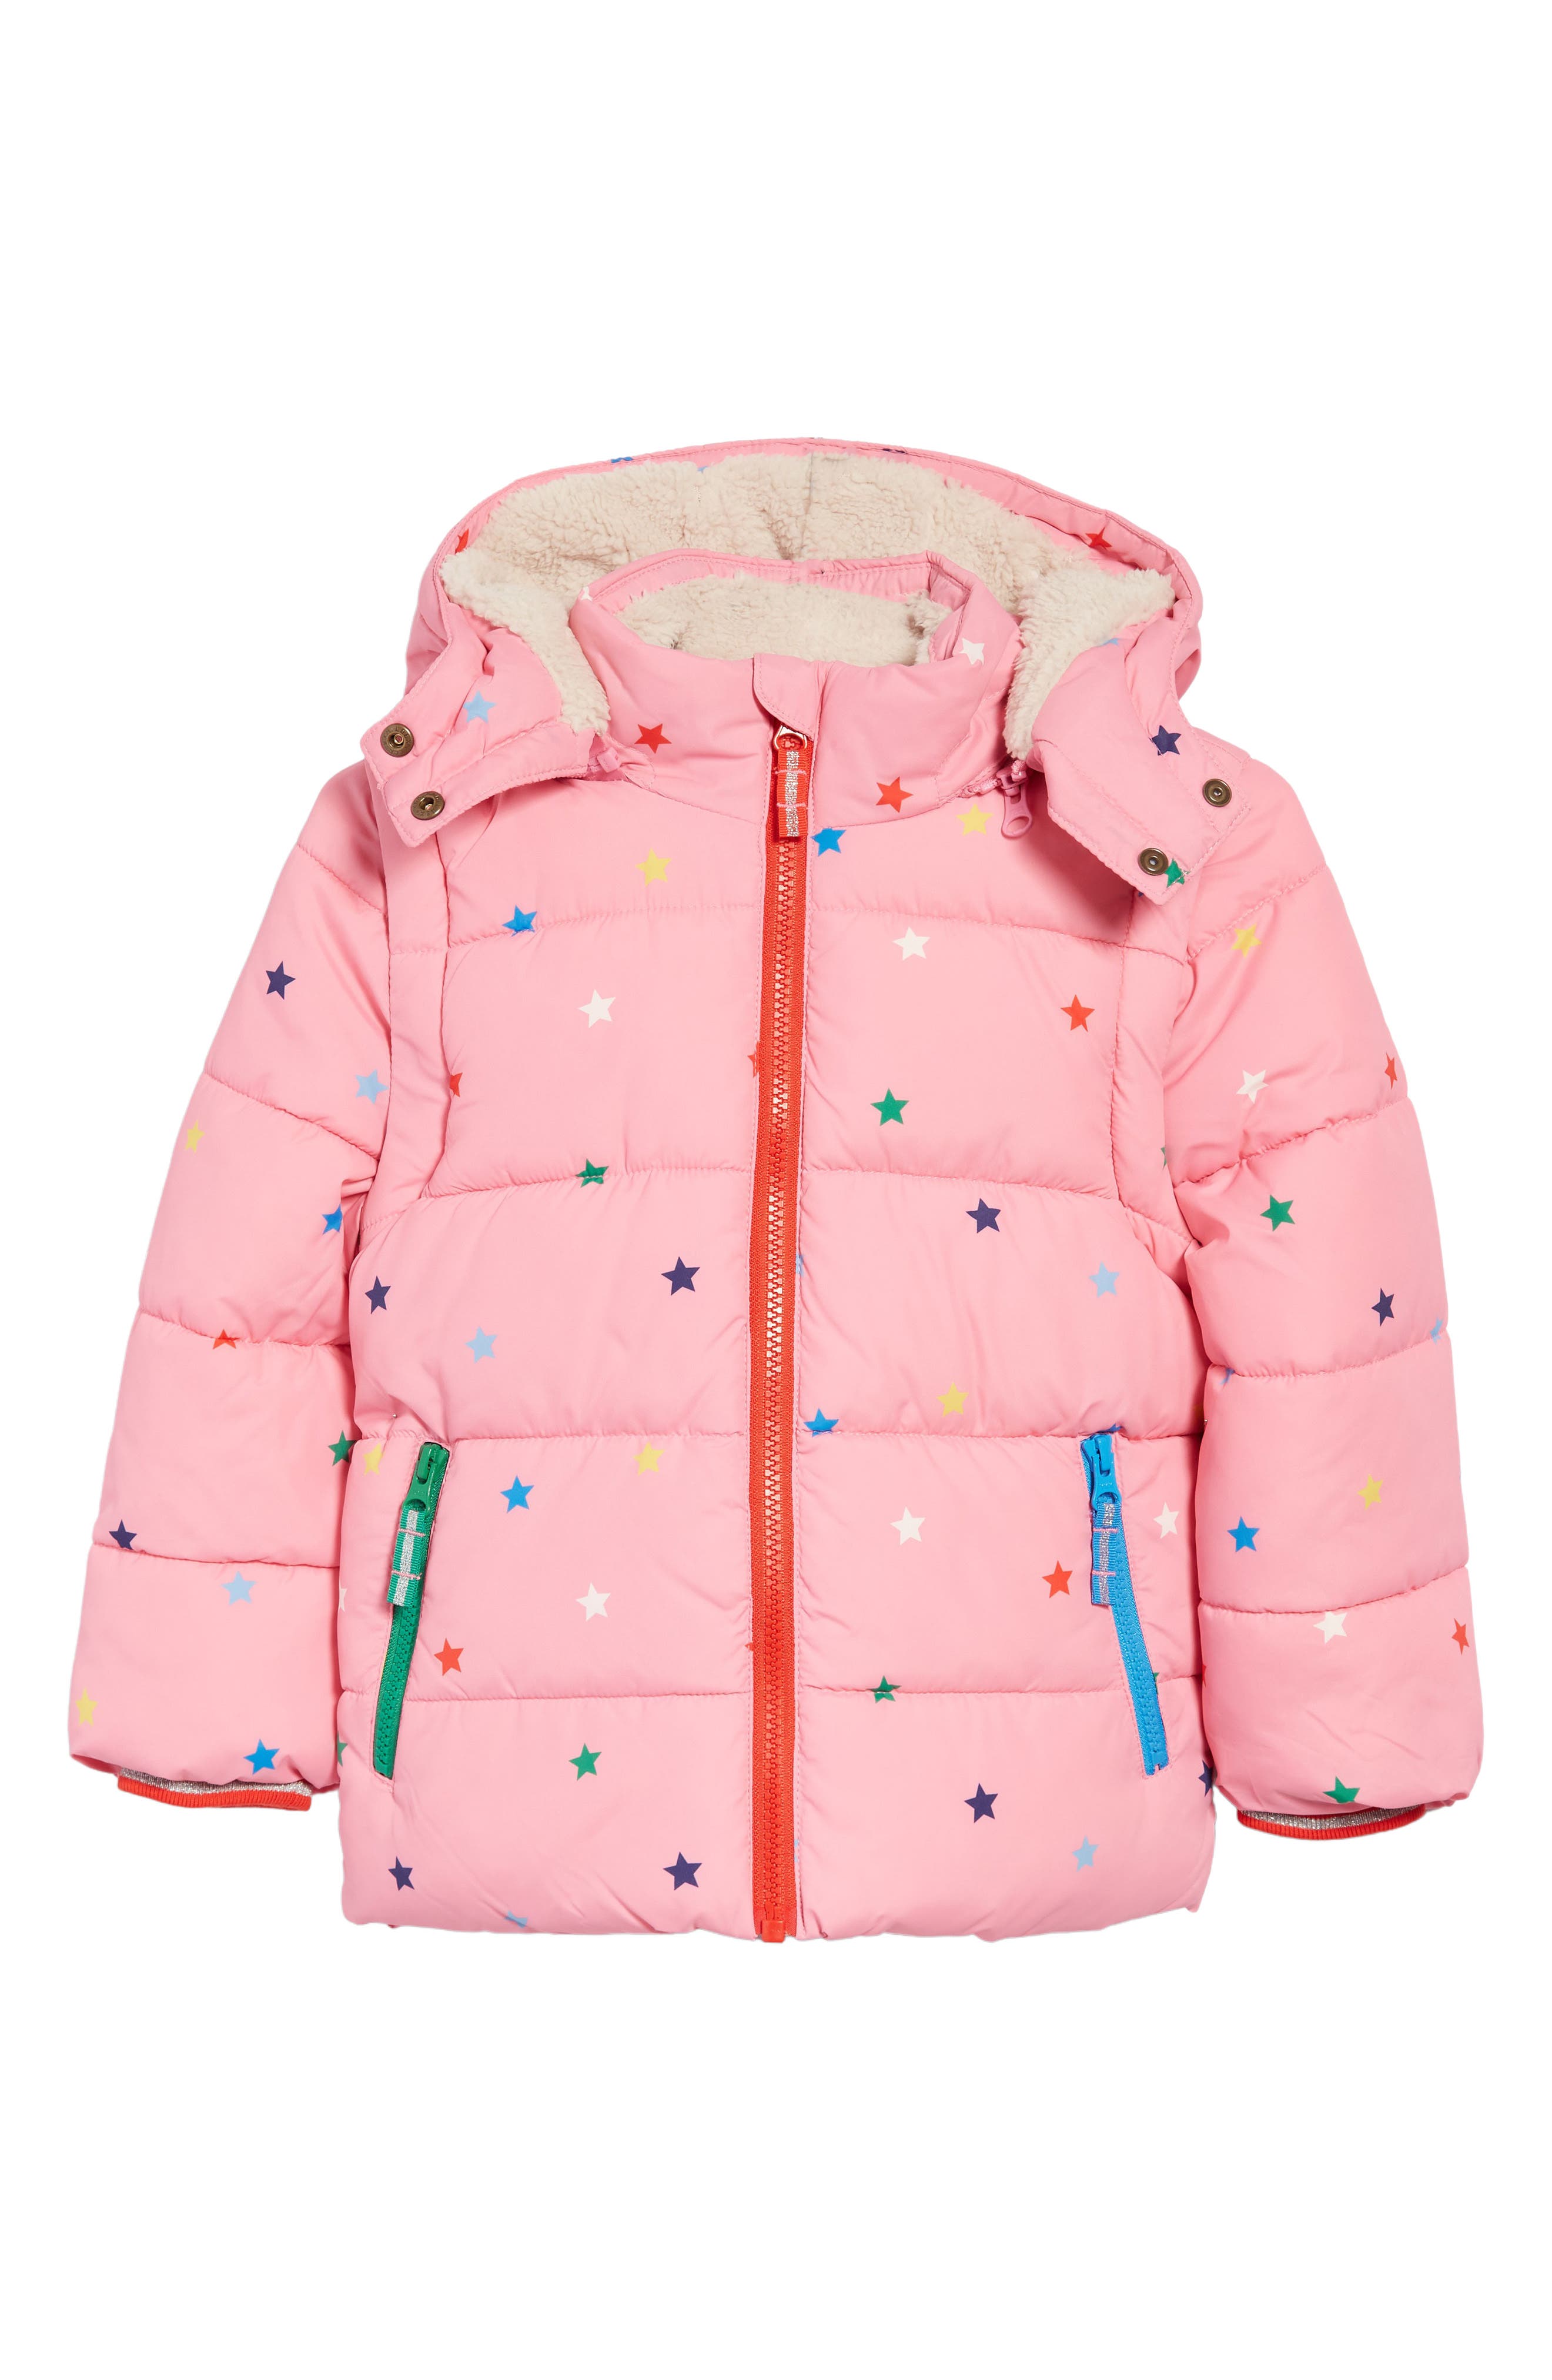 NoName Puffer jacket KIDS FASHION Coats Casual Gray/Pink 8Y discount 87% 